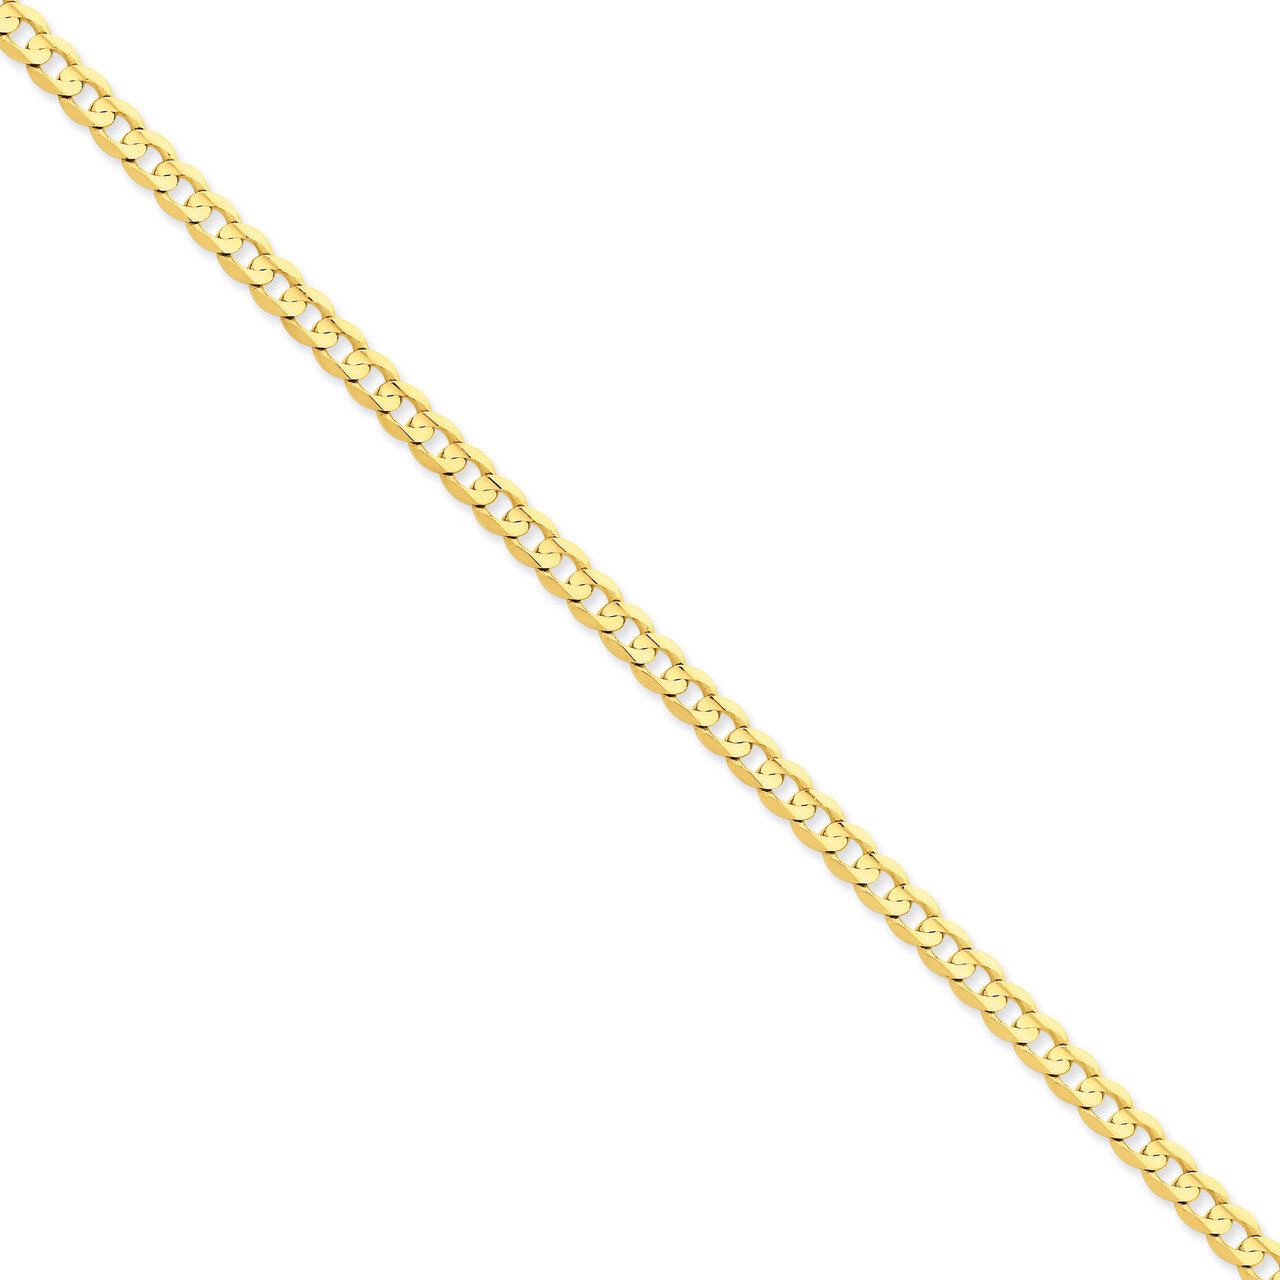 5.25mm Open Concave Curb Chain 7 Inch 14k Gold LCR140-7